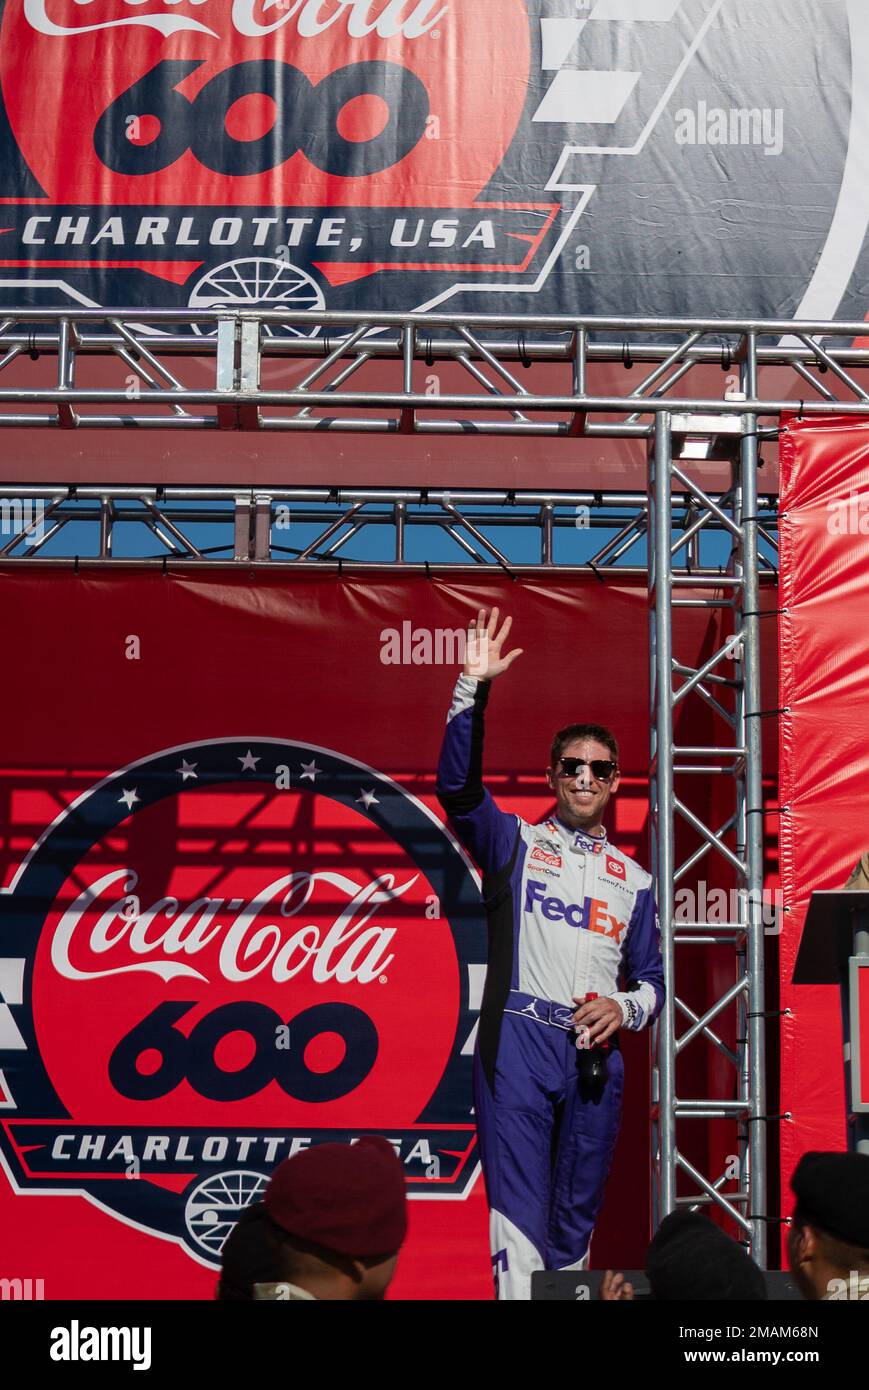 NASCAR driver Denny Hamlin is introduced during pre-race festivities at the NASCAR Coca-Cola 600 in Charlotte, North Carolina, May 29, 2022. (U.S. Air Force photo/Jim Bove) Stock Photo